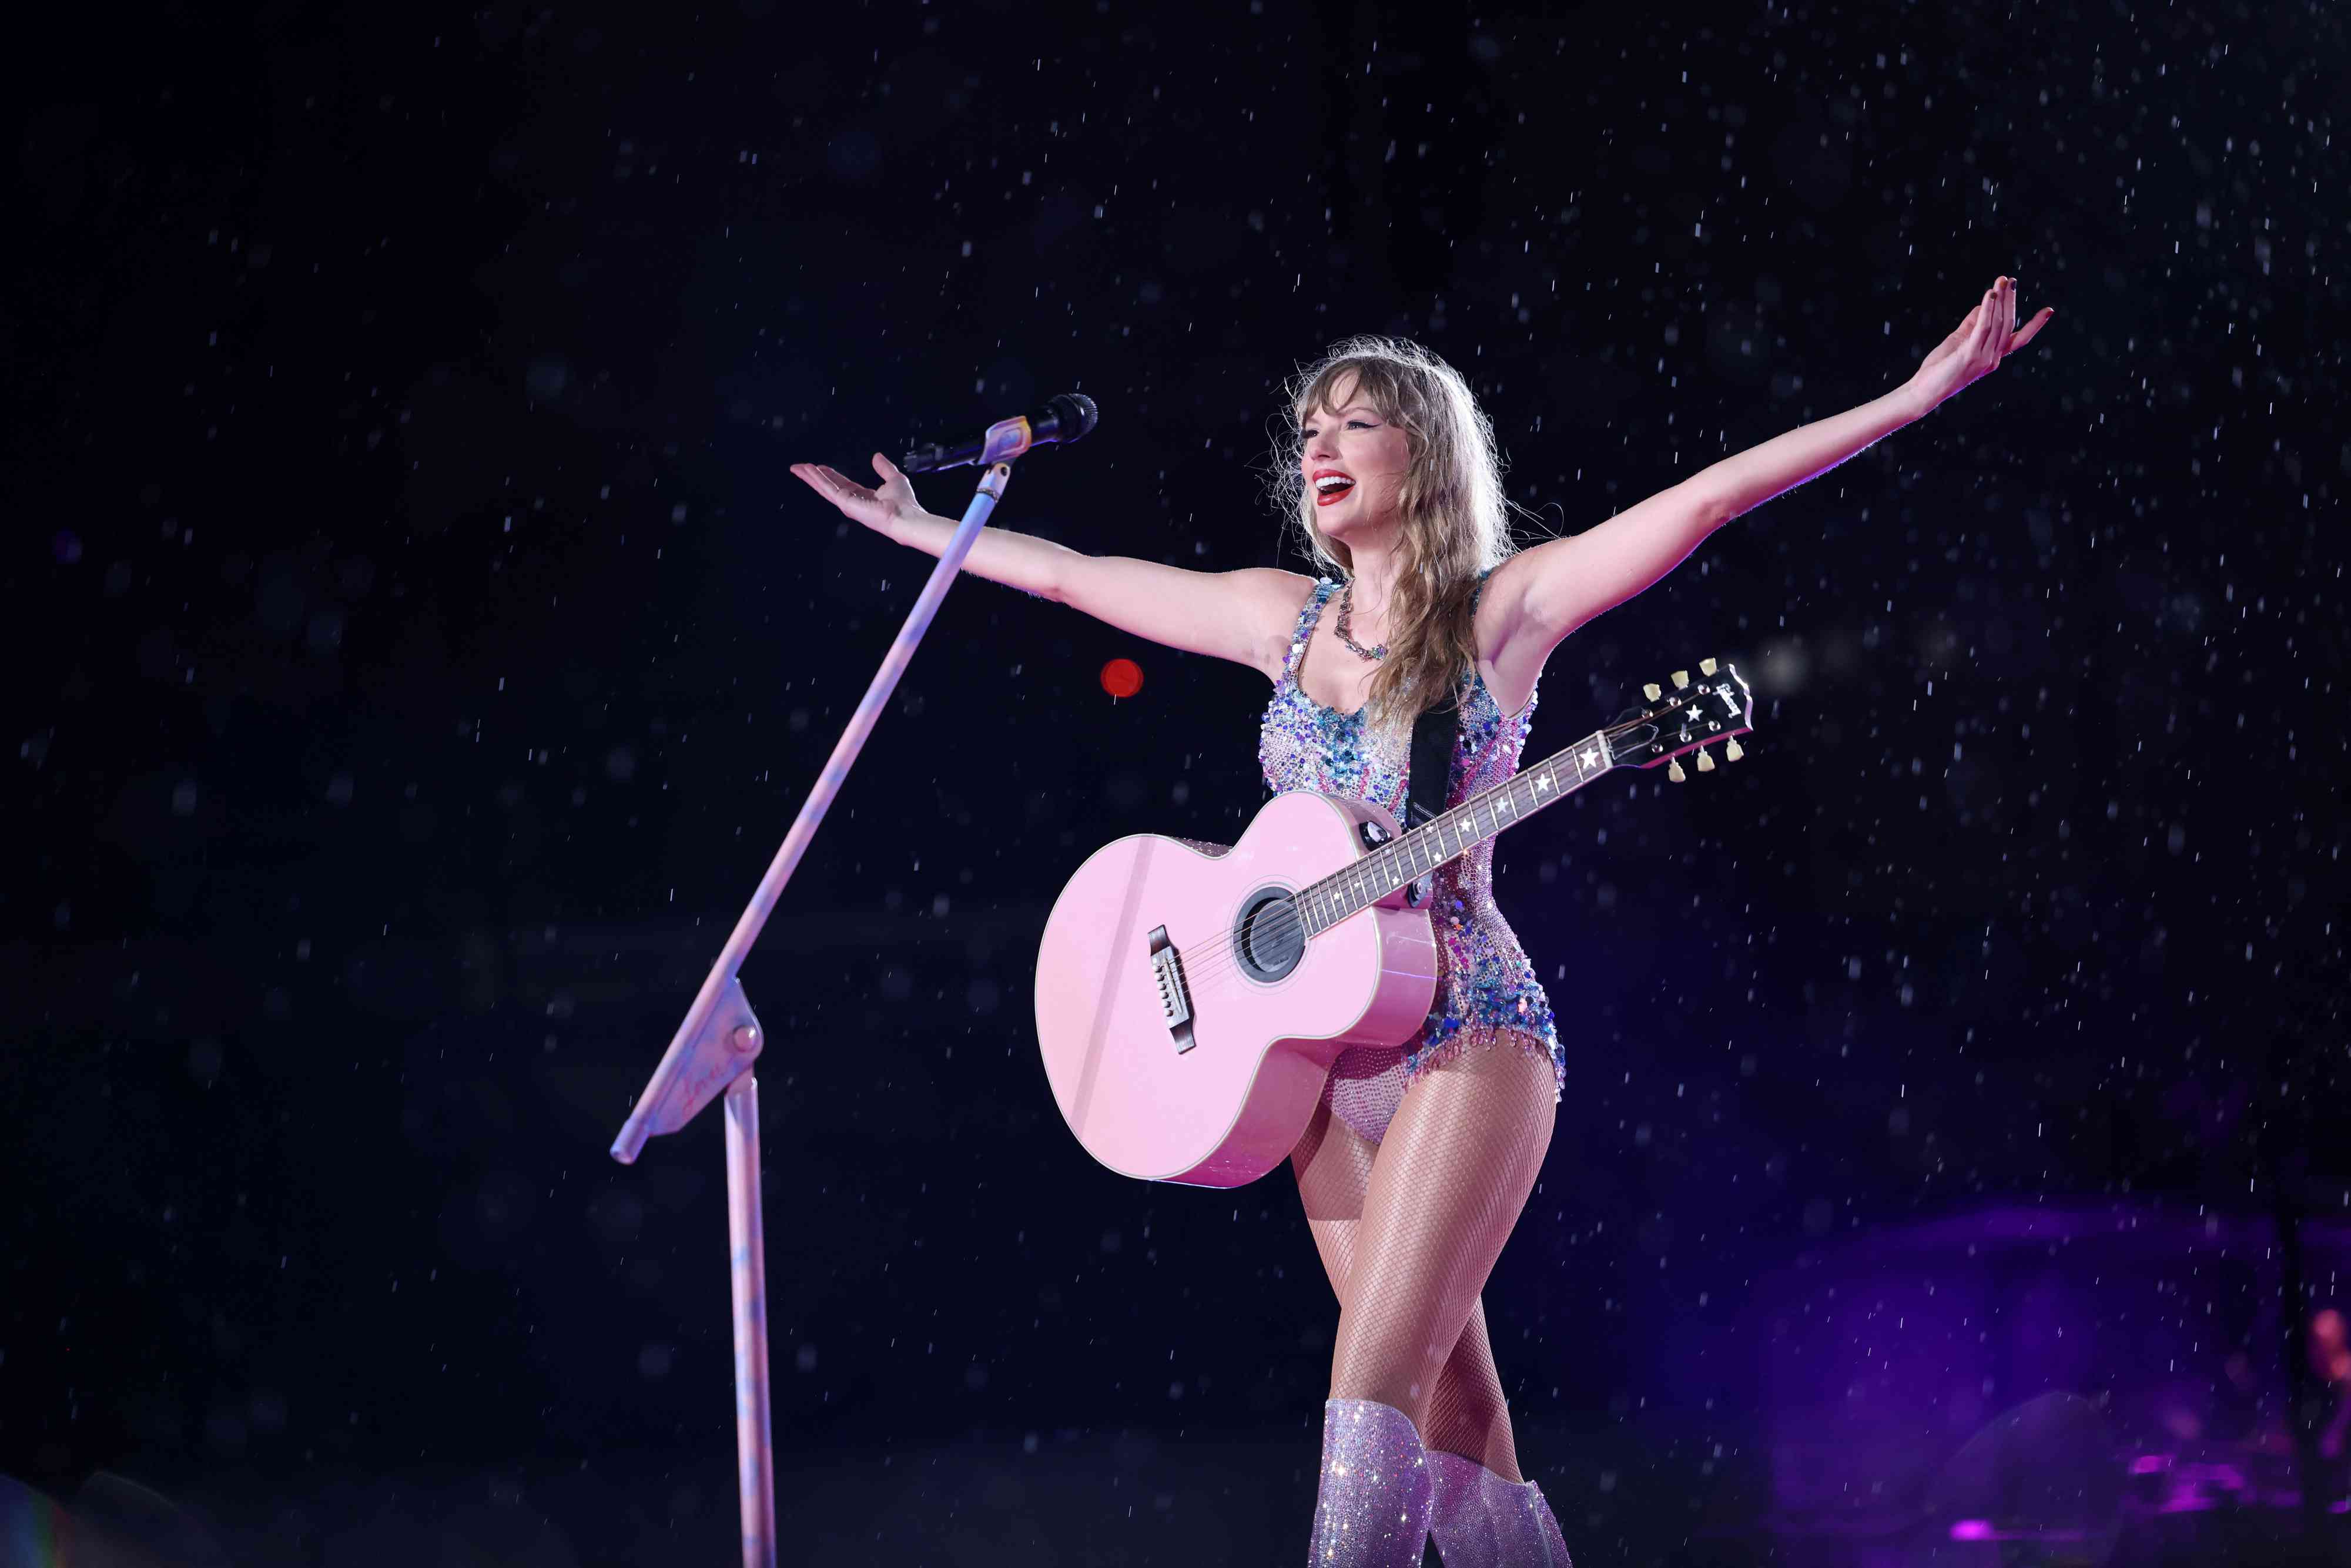 Taylor Swift Performing In Crystal Bodysuit and Guitar Hands Up to the Side 